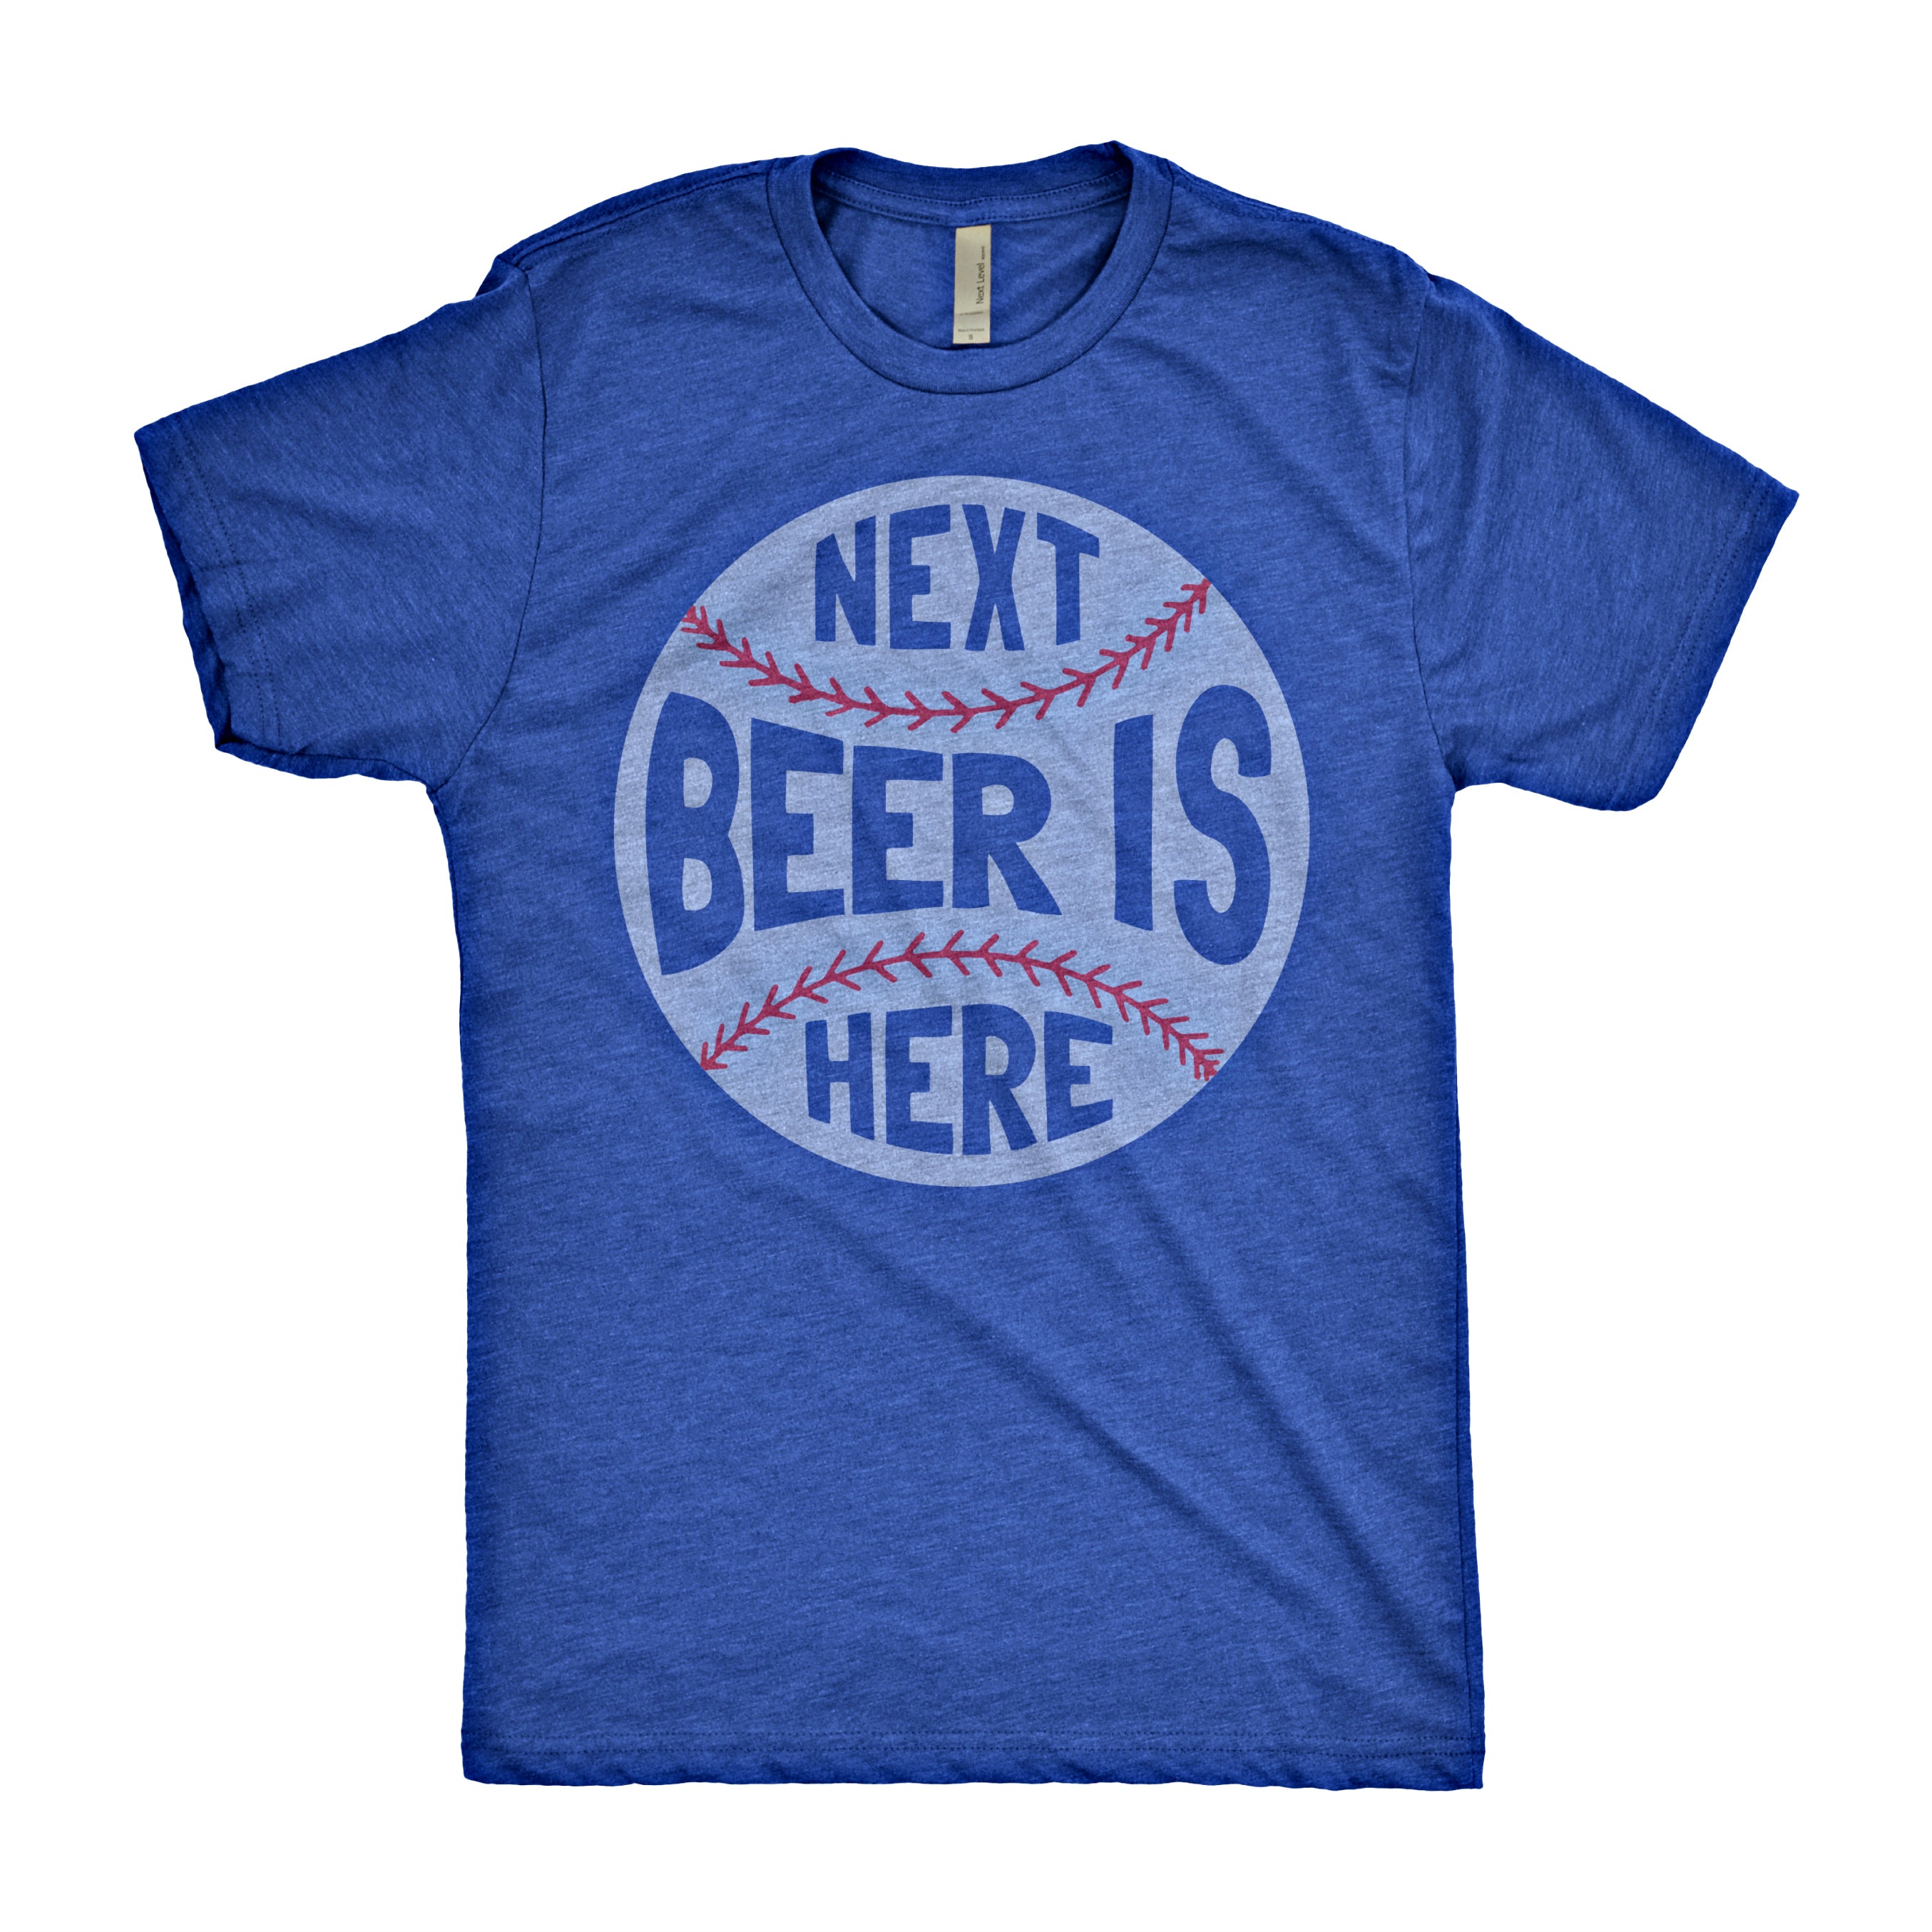 Next Beer is Here Shirt